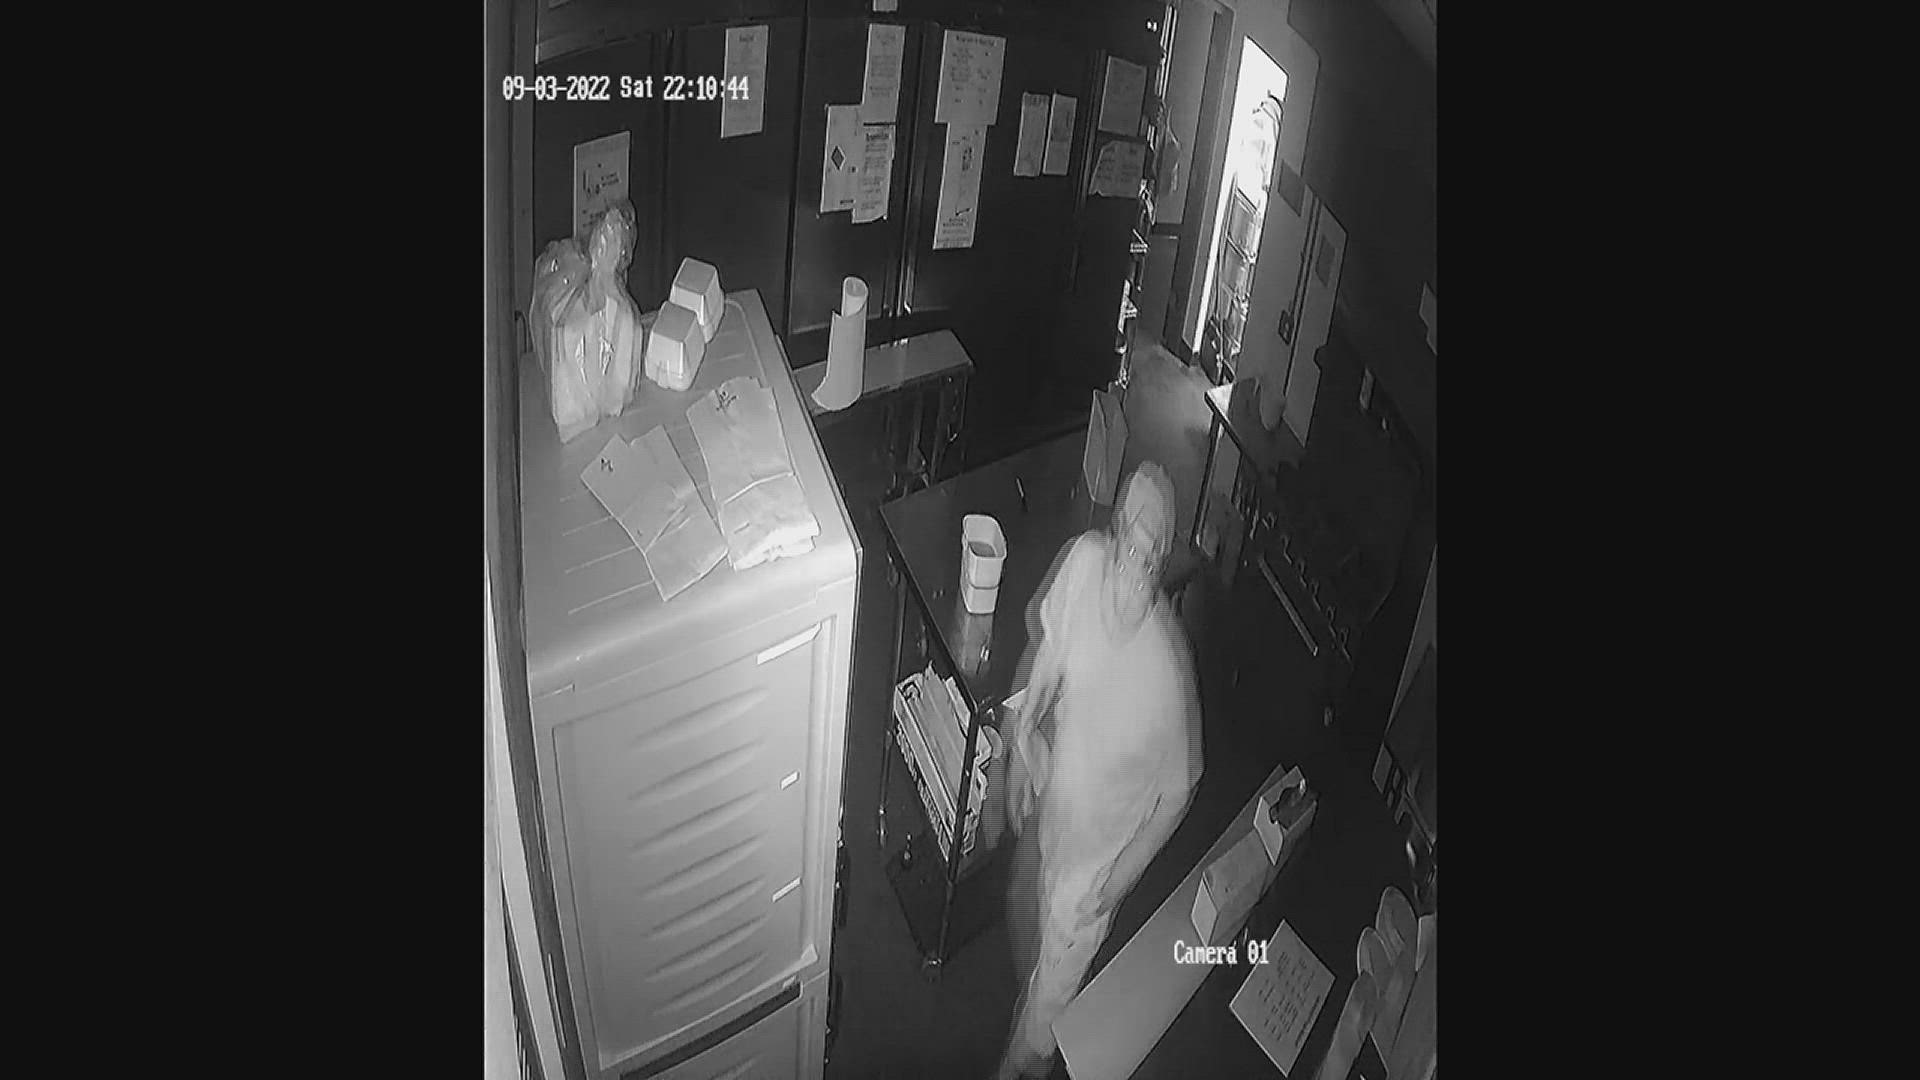 The owner of Marisela's Tamales on Walden Road says the man in the surveillance video stole $400 from two cash registers and their tip jar, plus some beer.